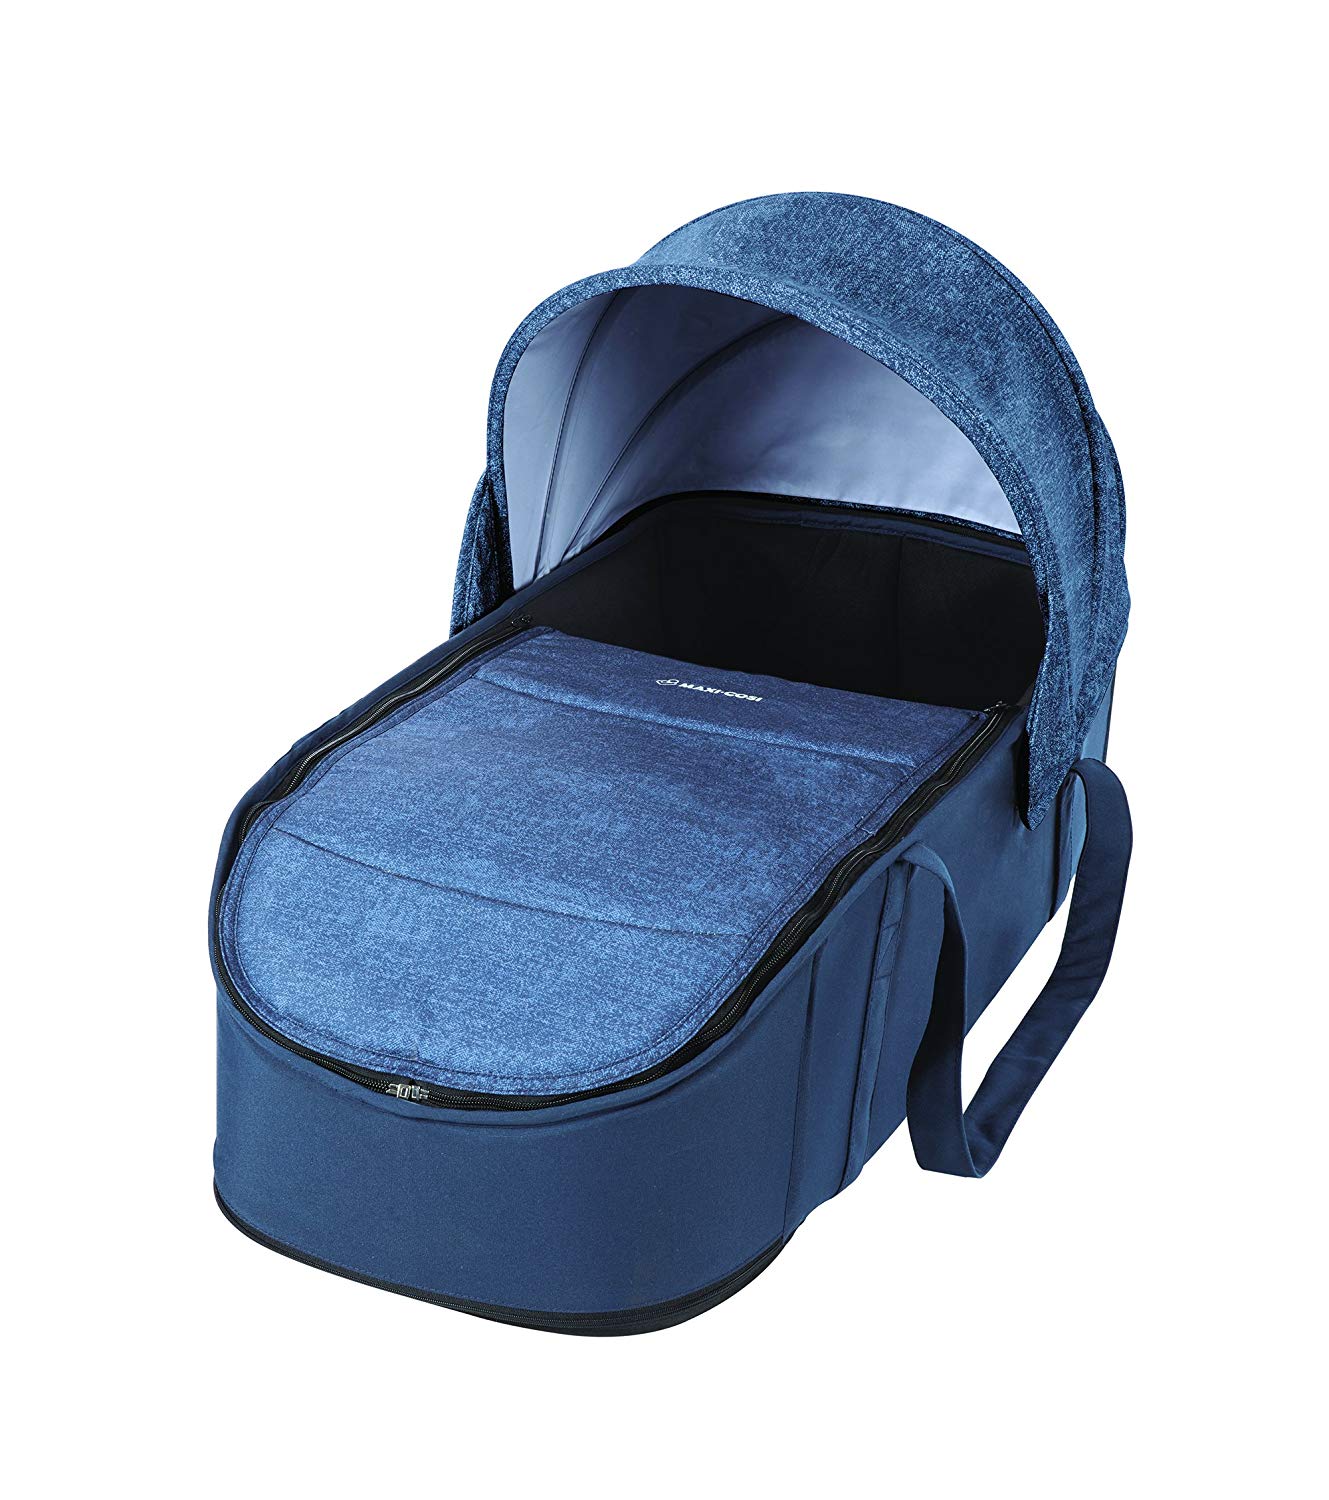 Maxi-Cosi LAIKA Super Light (Only 1.5kg) and Padded Soft Pram Attachment, Fits Maxi-Cosi Laika Pushchair, Baby Carry Bag, Suitable from Birth - Nomad Blue